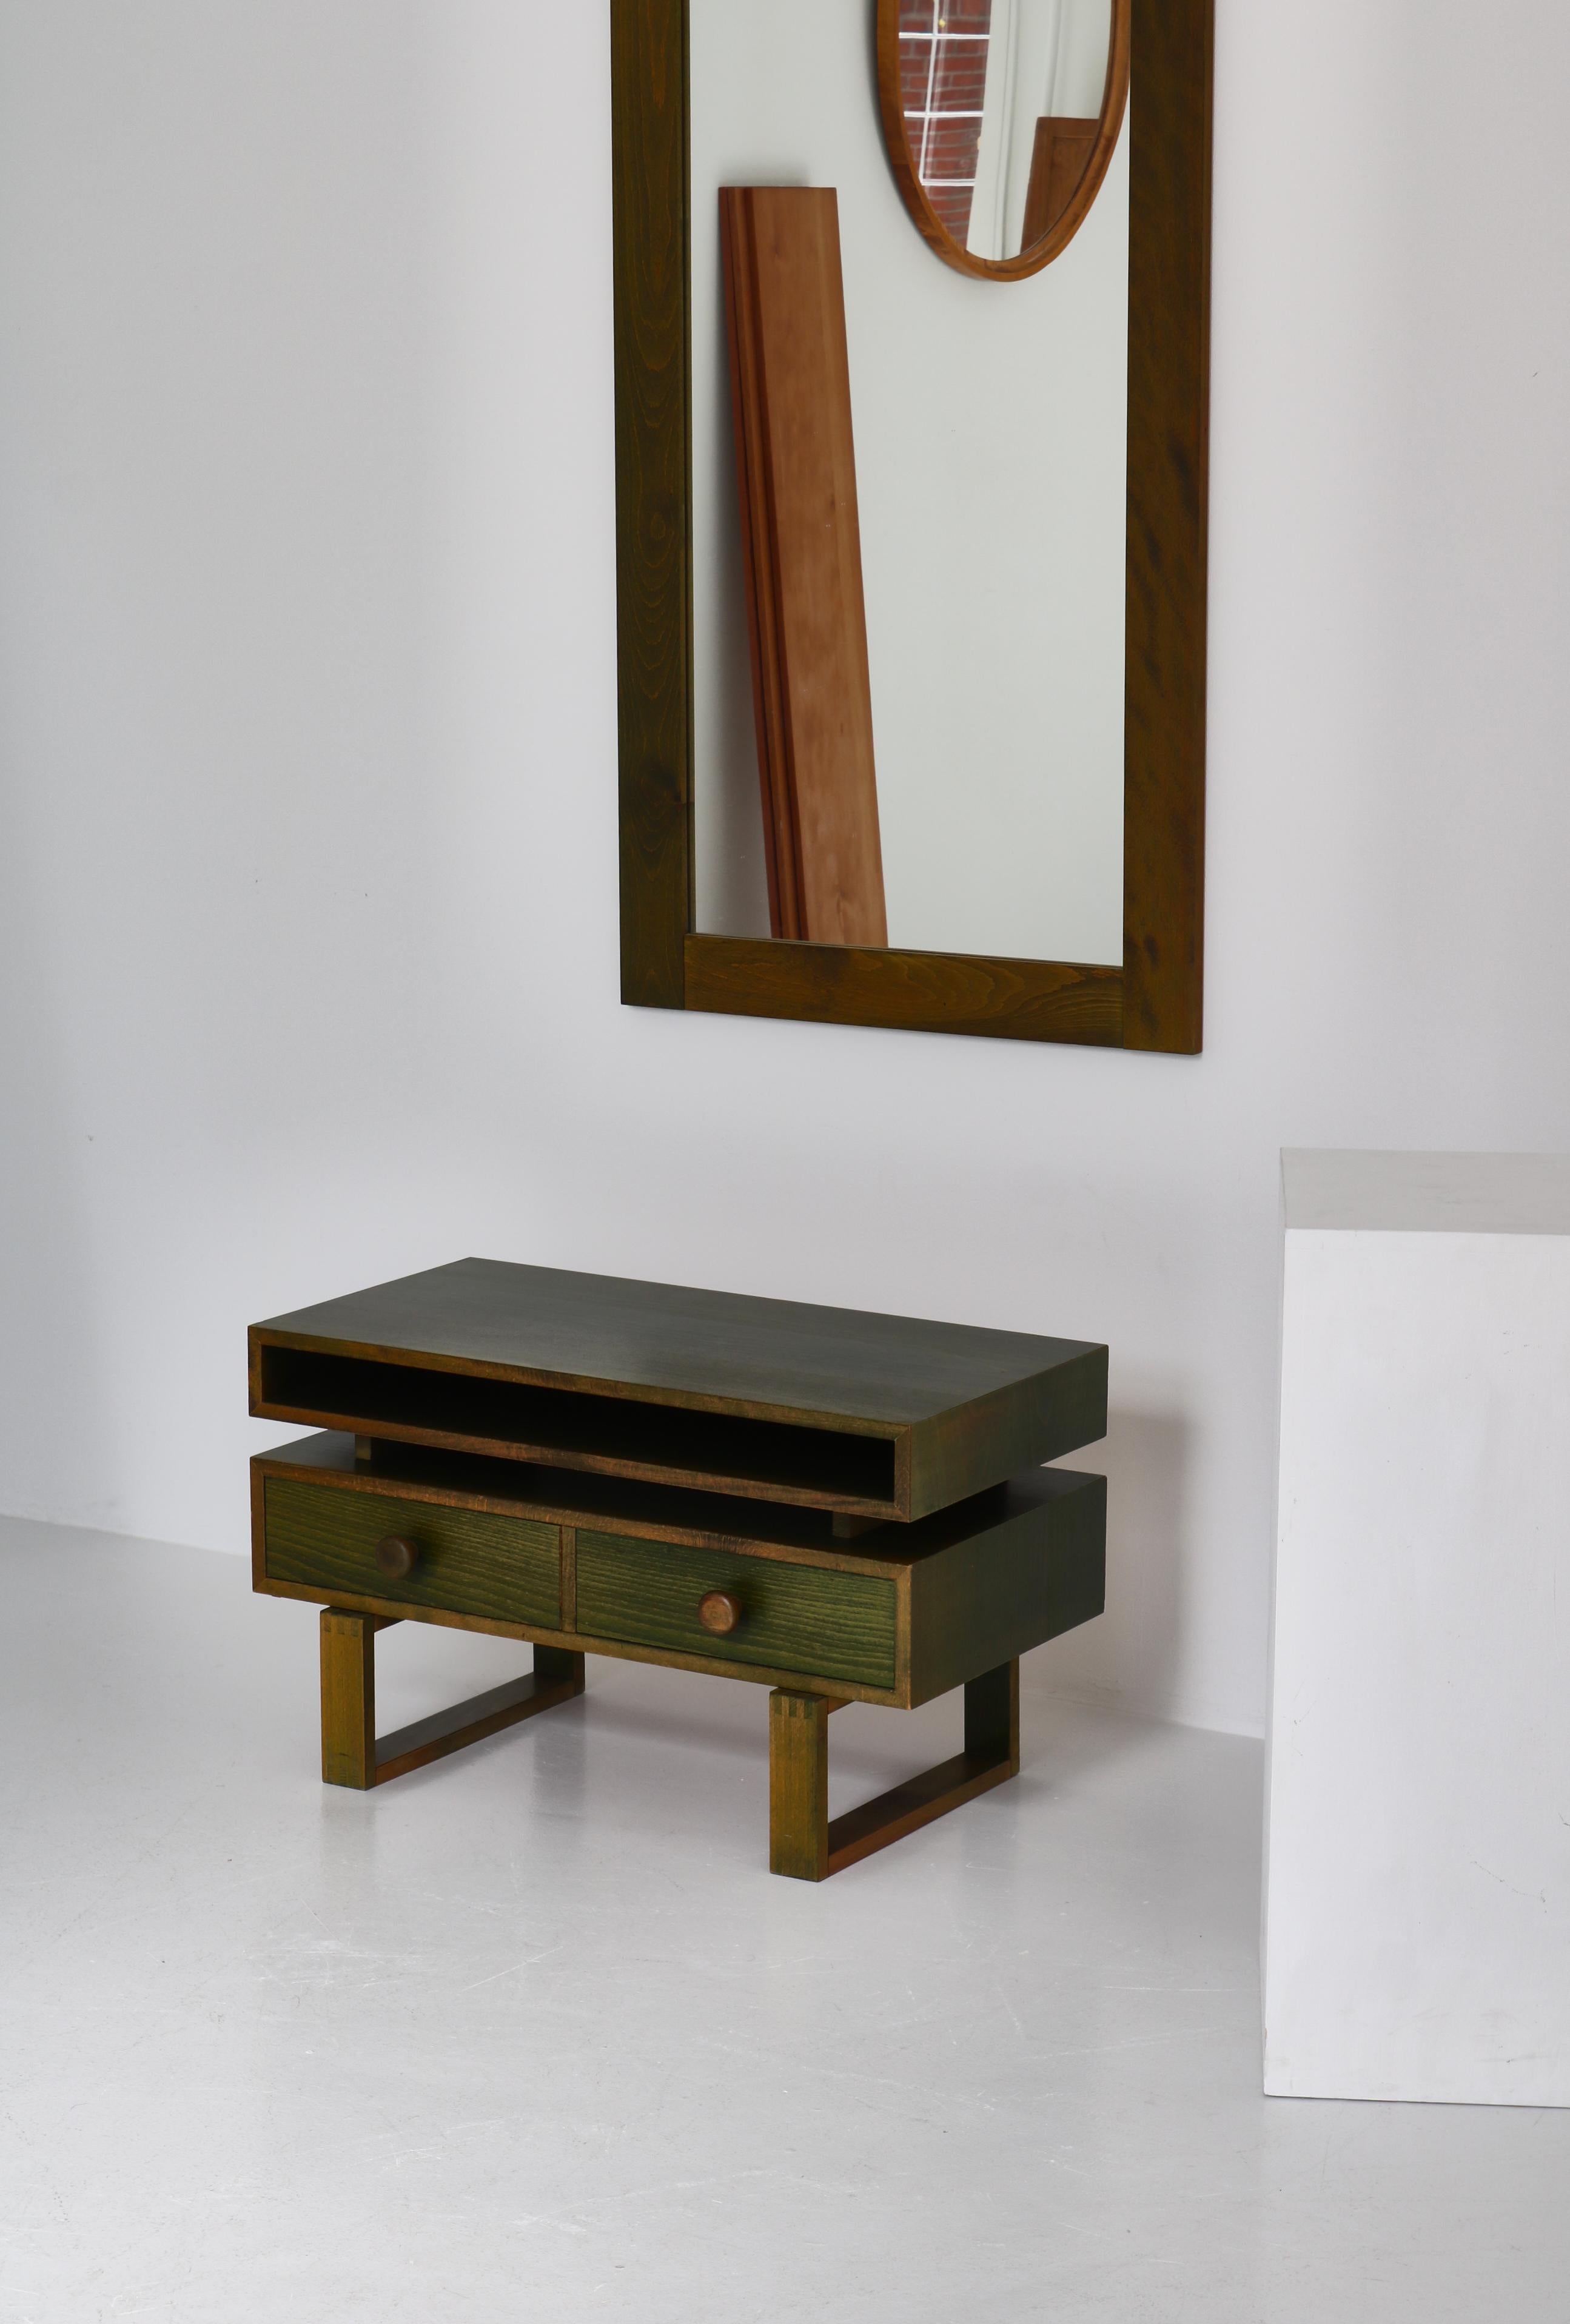 Scandinavian Modern Chest & Mirror in Green Stained Pinewood, Denmark, 1970s In Good Condition For Sale In Odense, DK